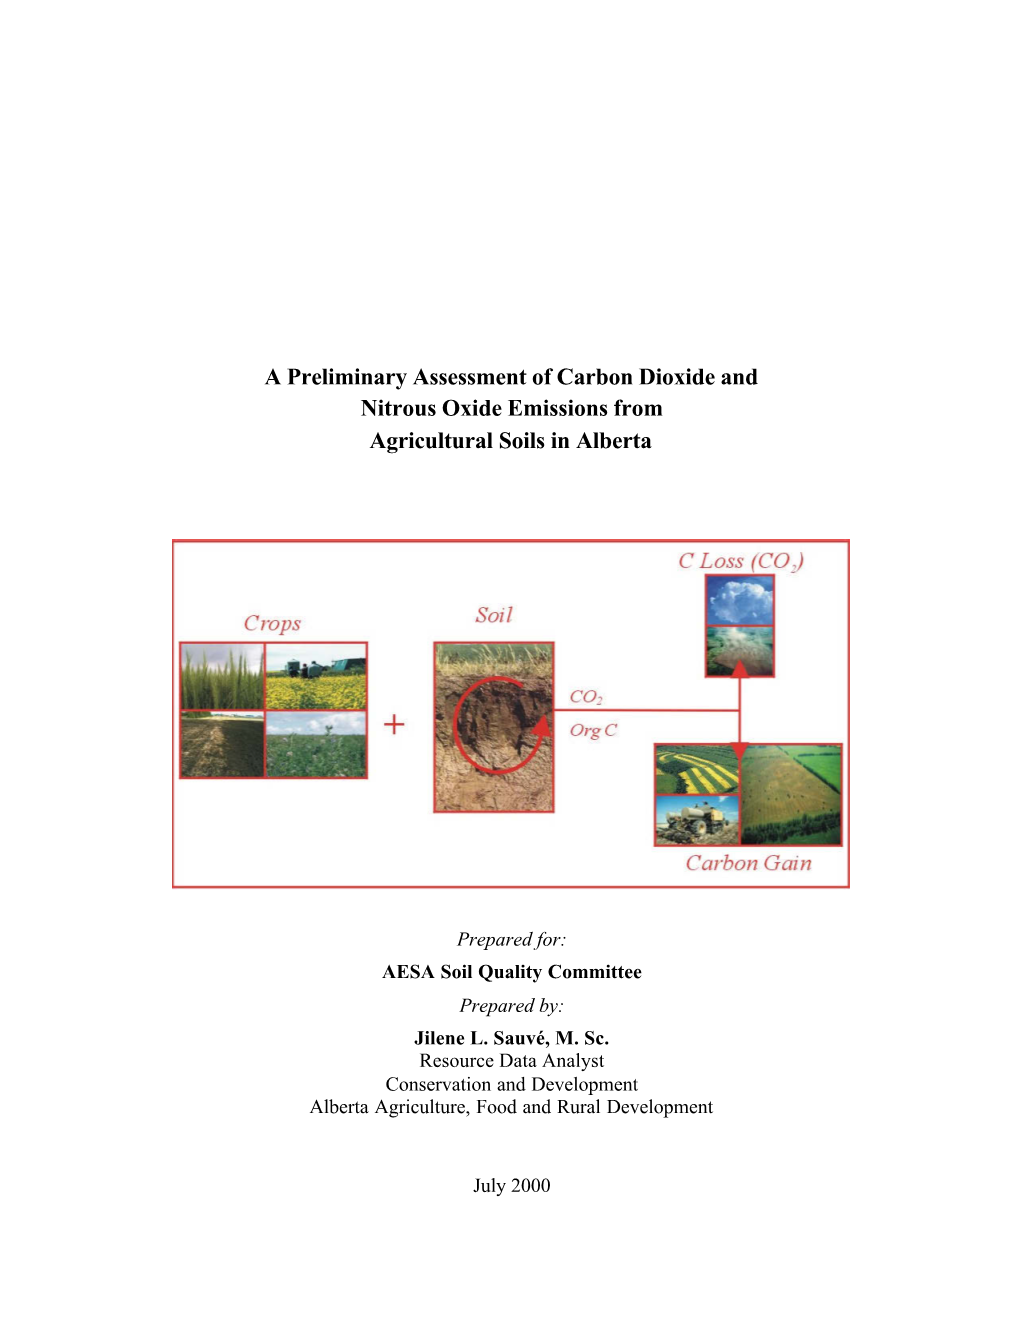 A Preliminary Assessment of Carbon Dioxide and Nitrous Oxide Emissions from Agricultural Soils in Alberta